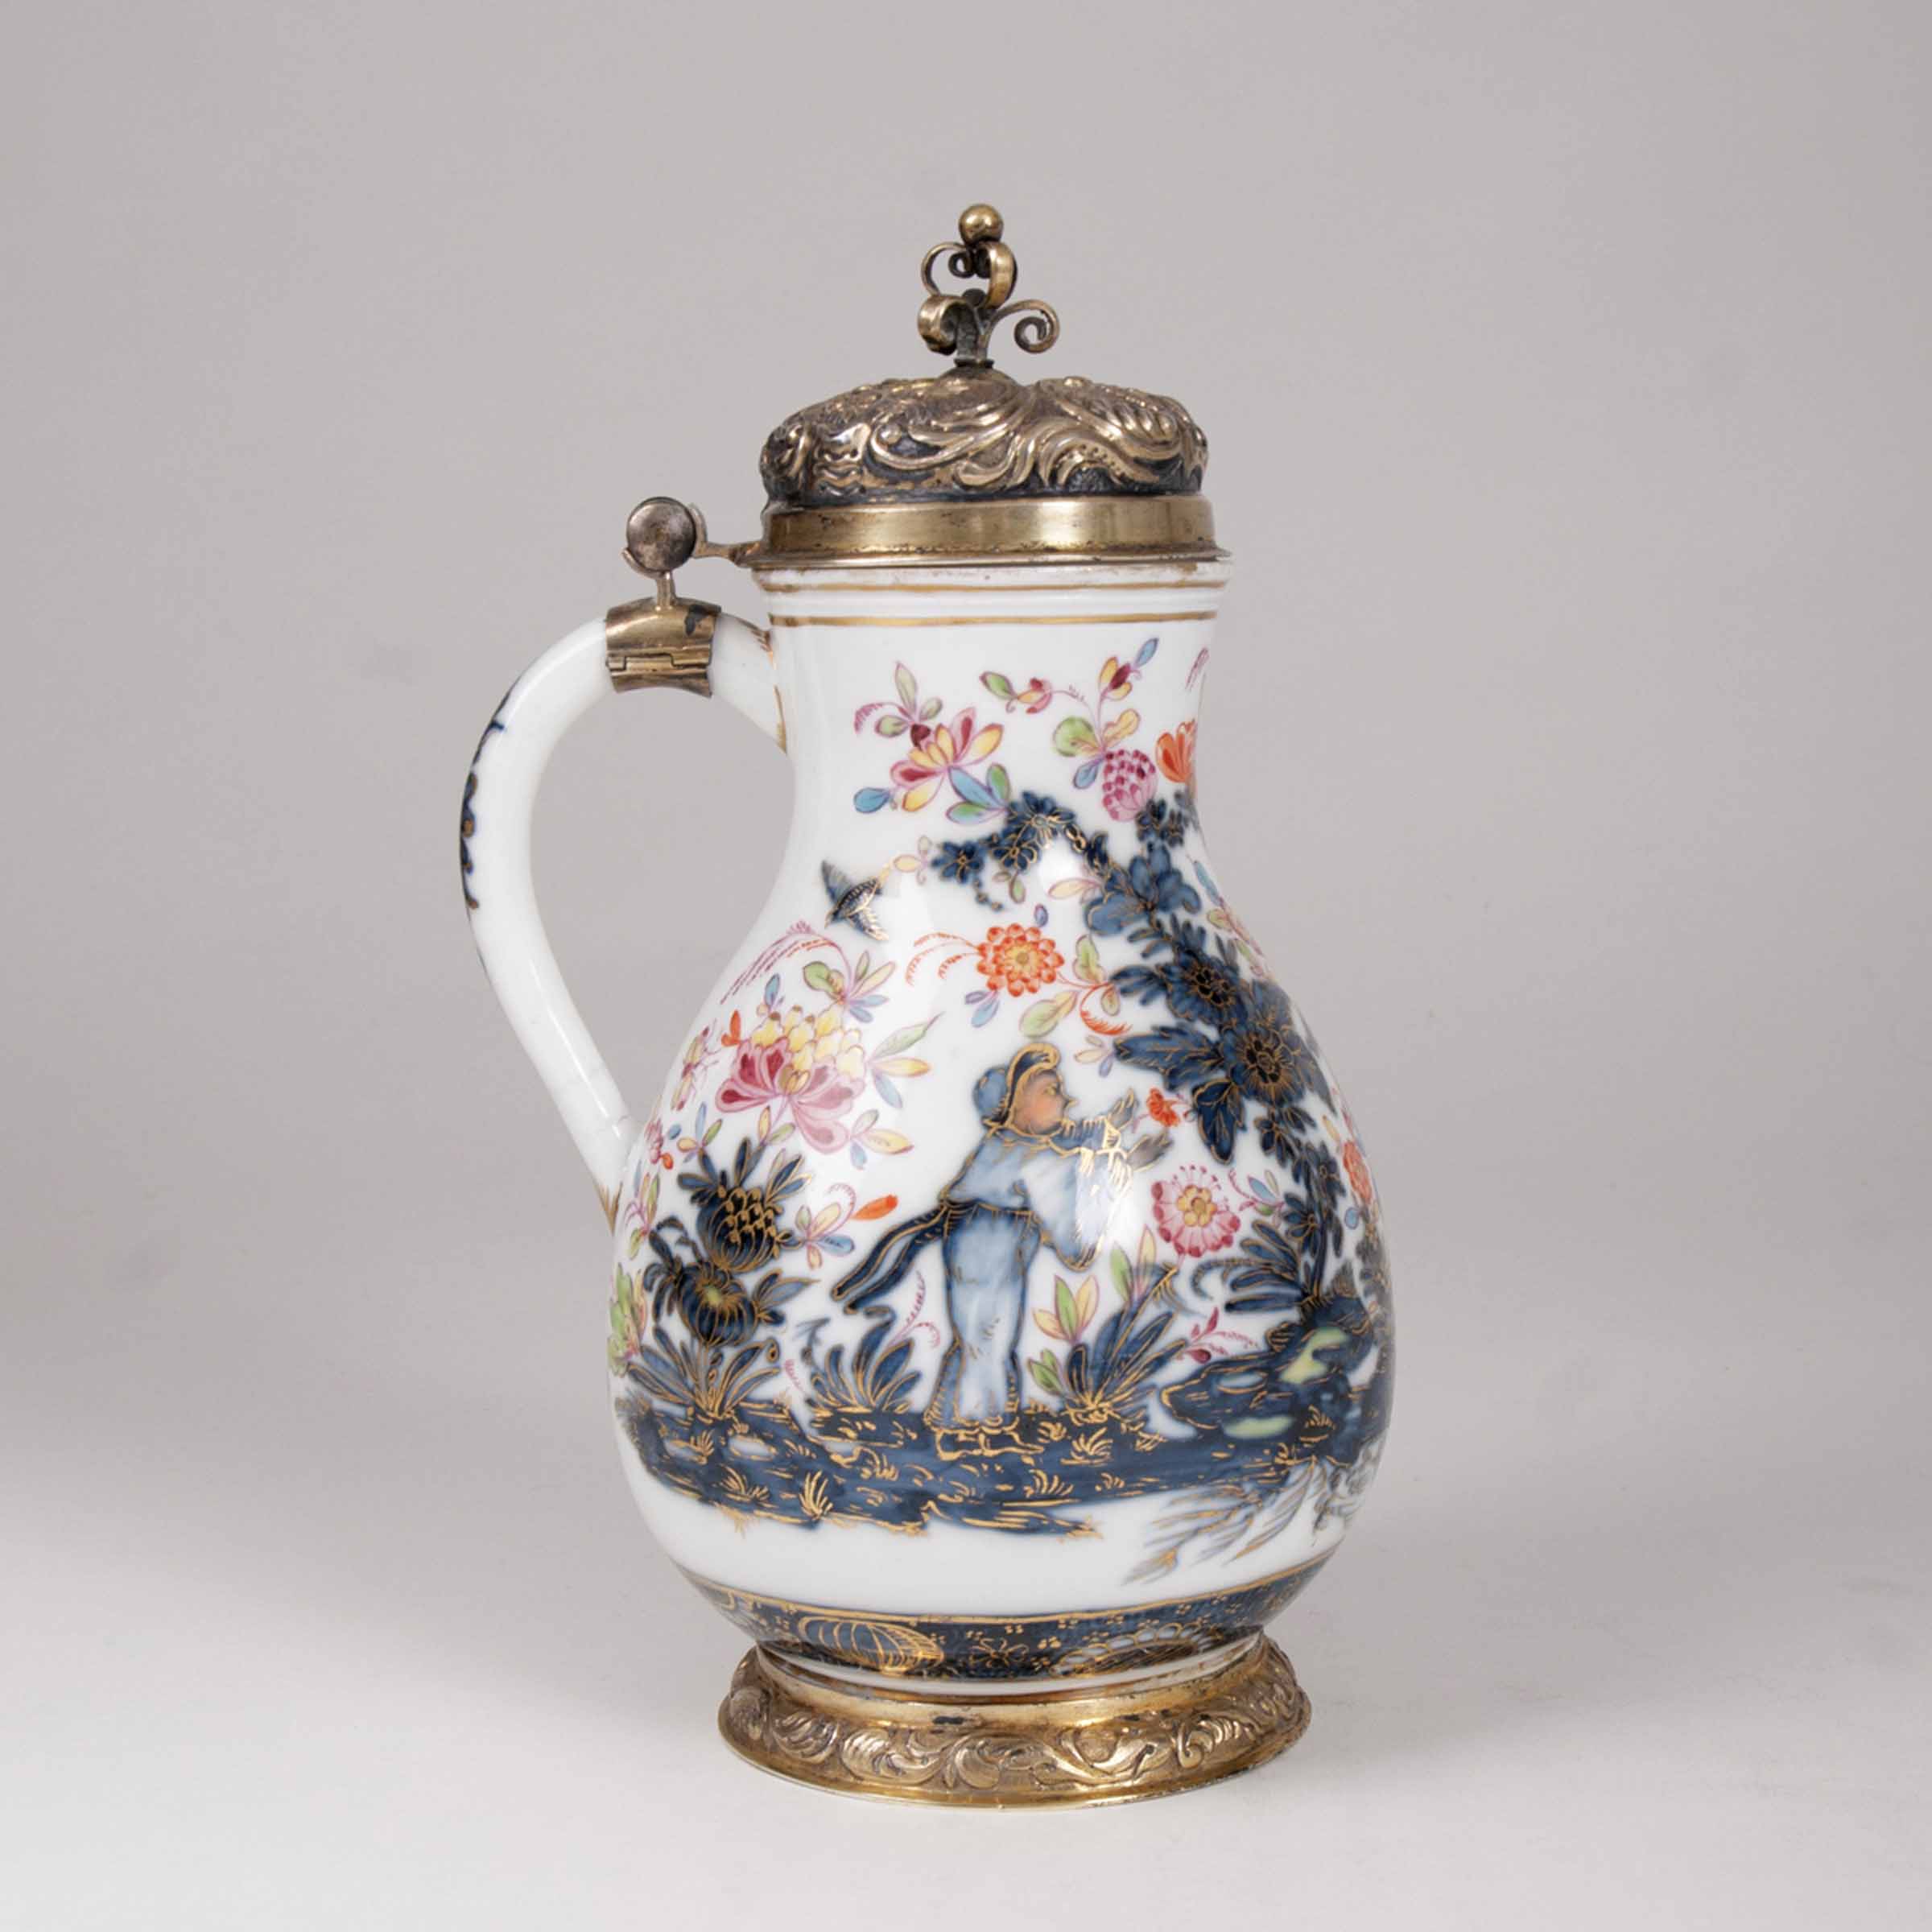 A rare early jug with chinoiserie - image 3